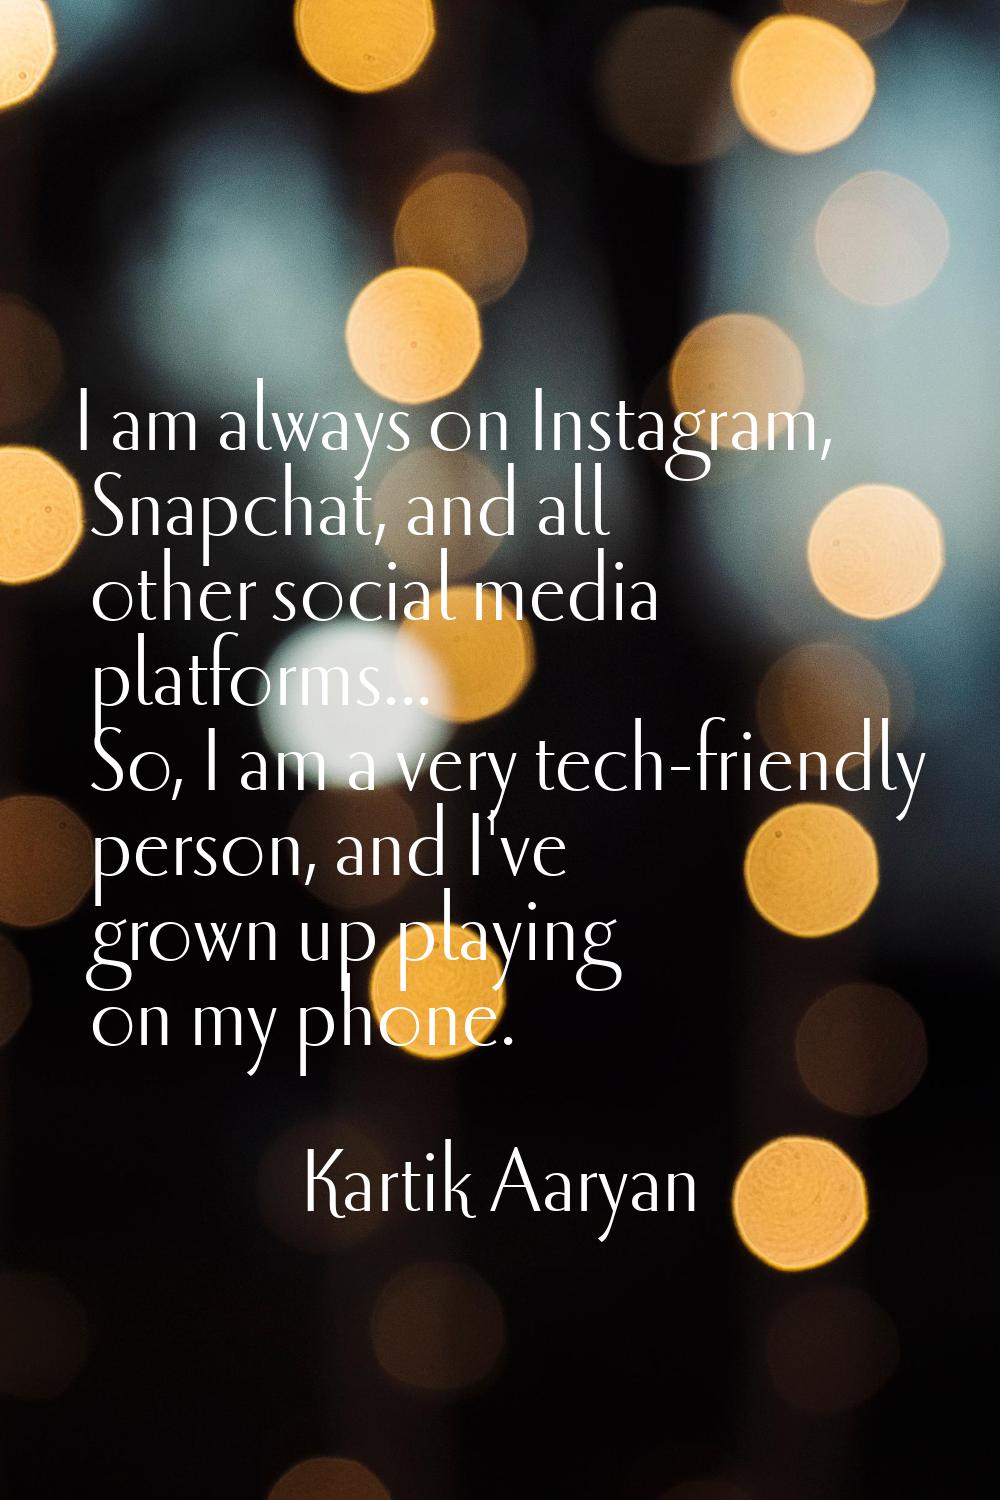 I am always on Instagram, Snapchat, and all other social media platforms... So, I am a very tech-fr